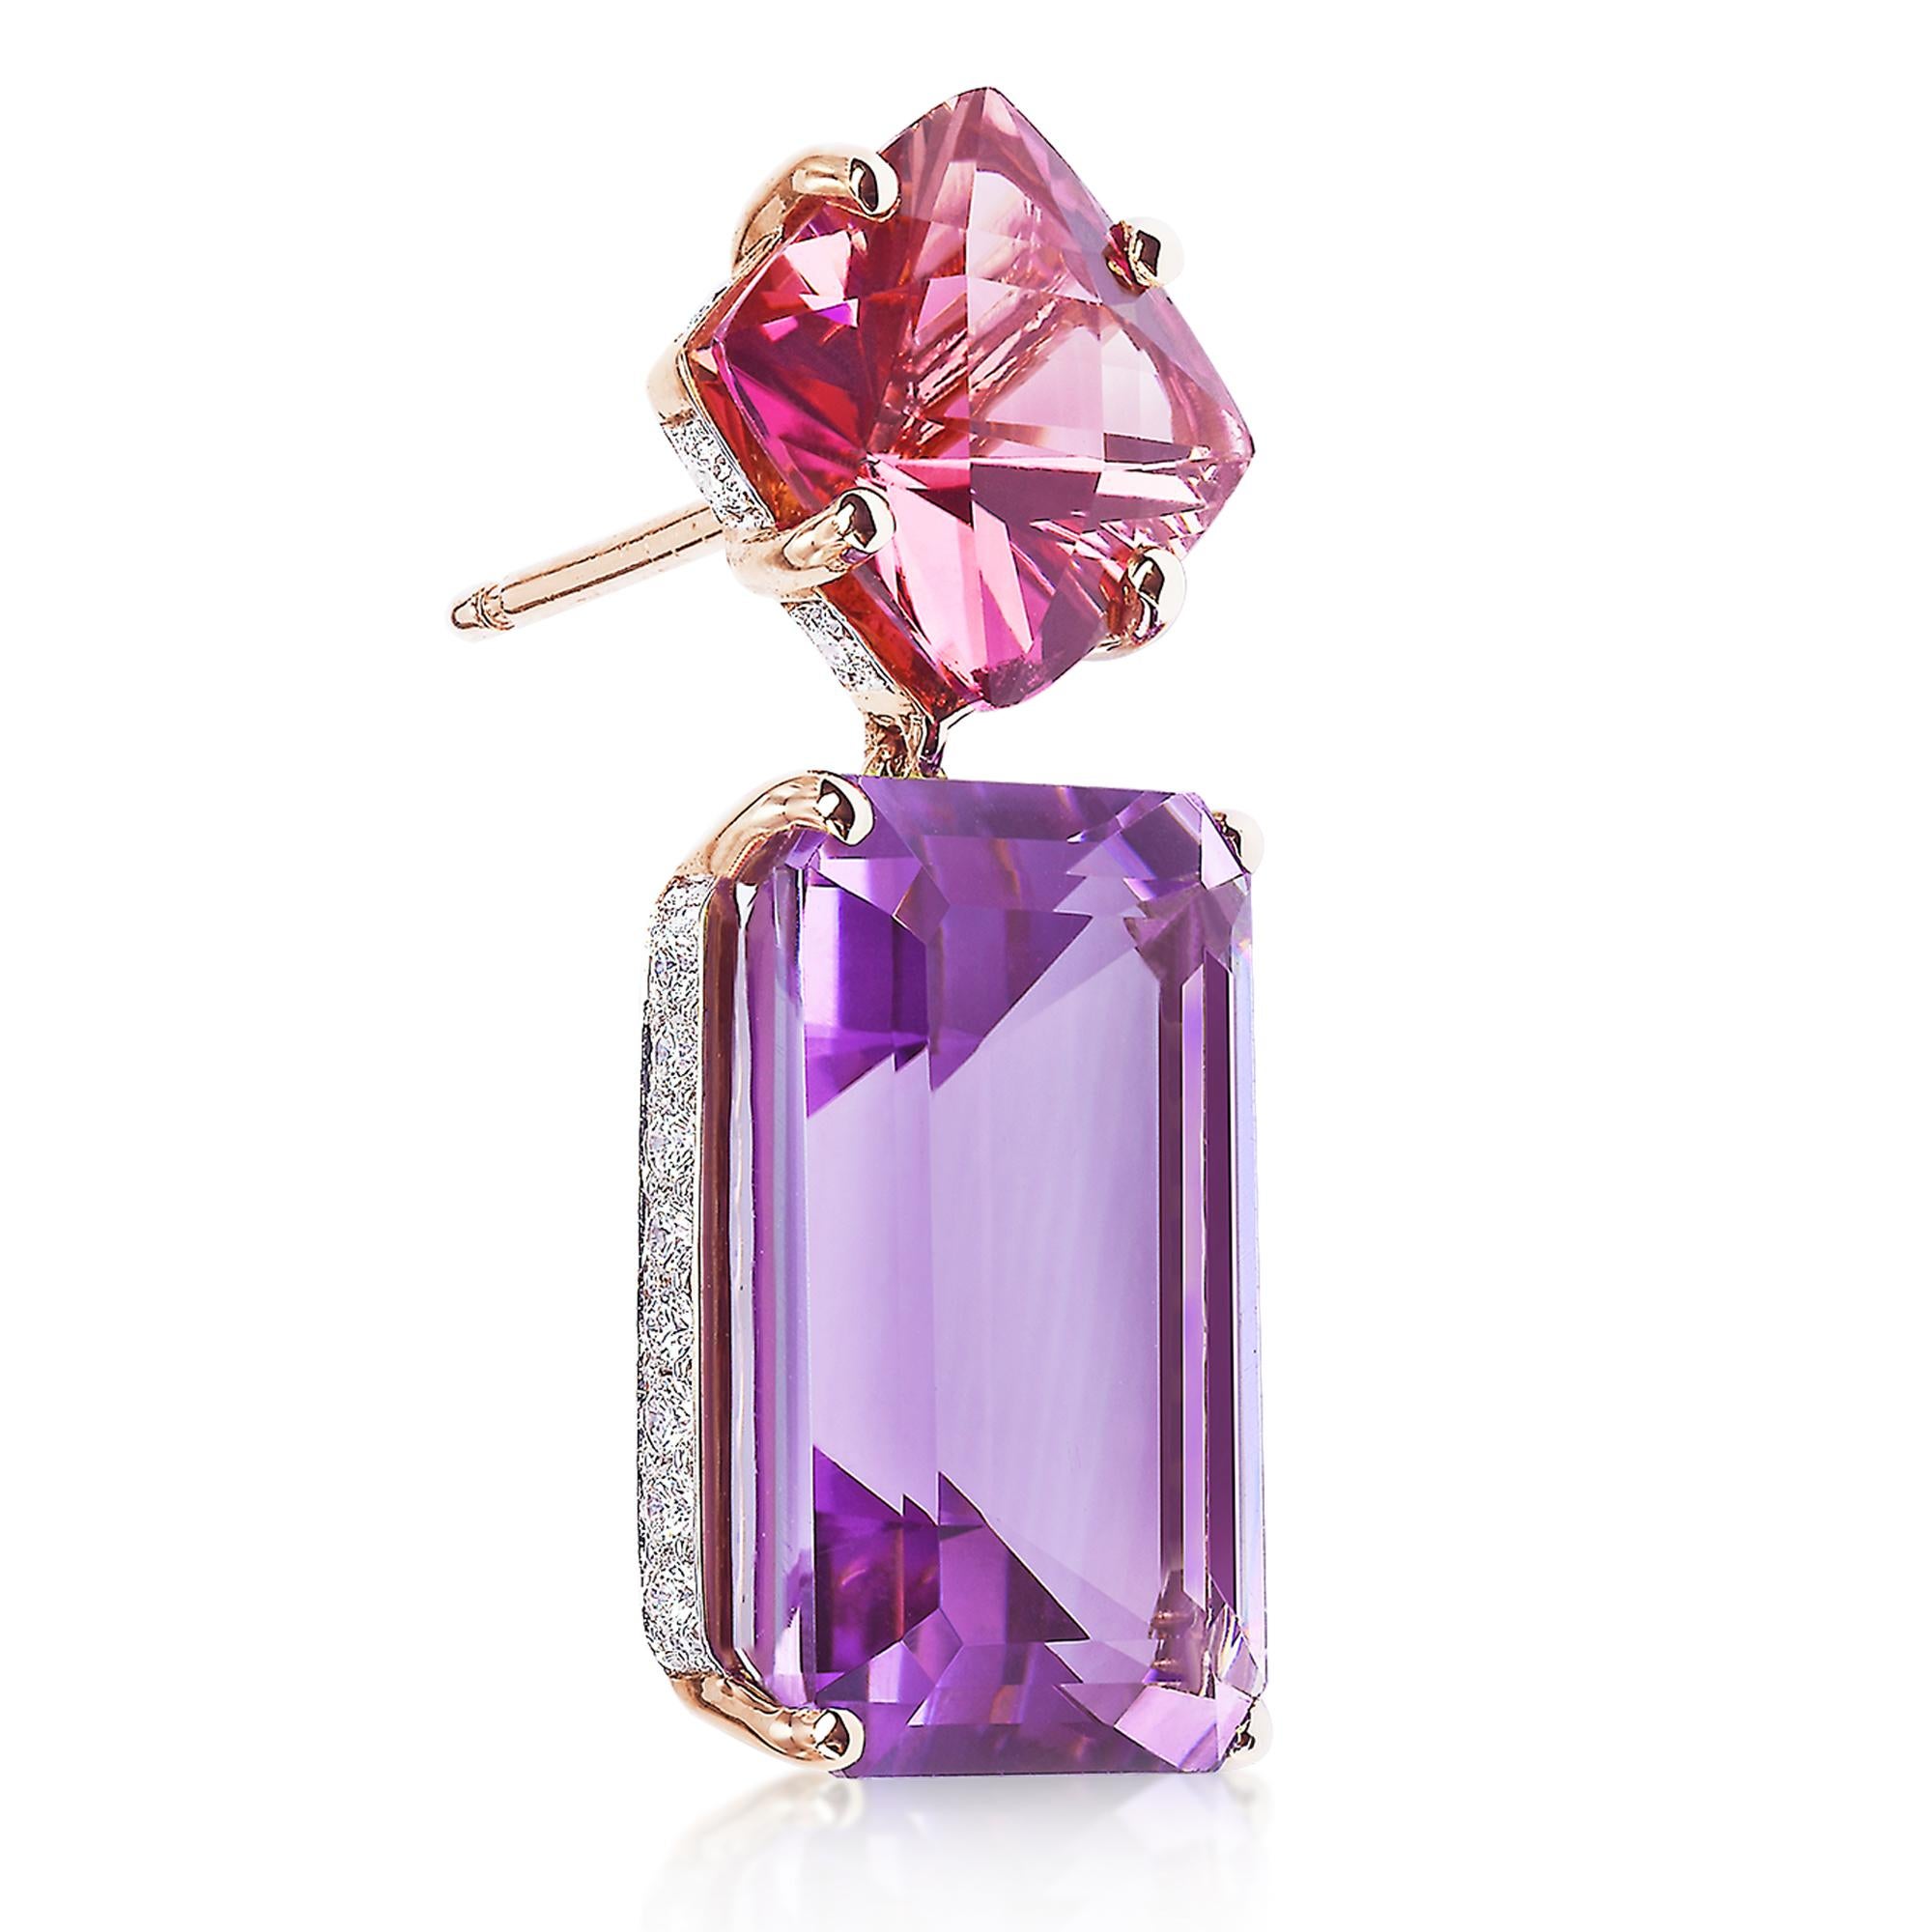 One of a kind emerald cut change of color tourmaline and emerald cut amethyst earrings set in 18kt rose gold with diamond detailing.

This one of a kind earring was designed to achieve the perfect proportions for a day-to-night earring. Timeless,